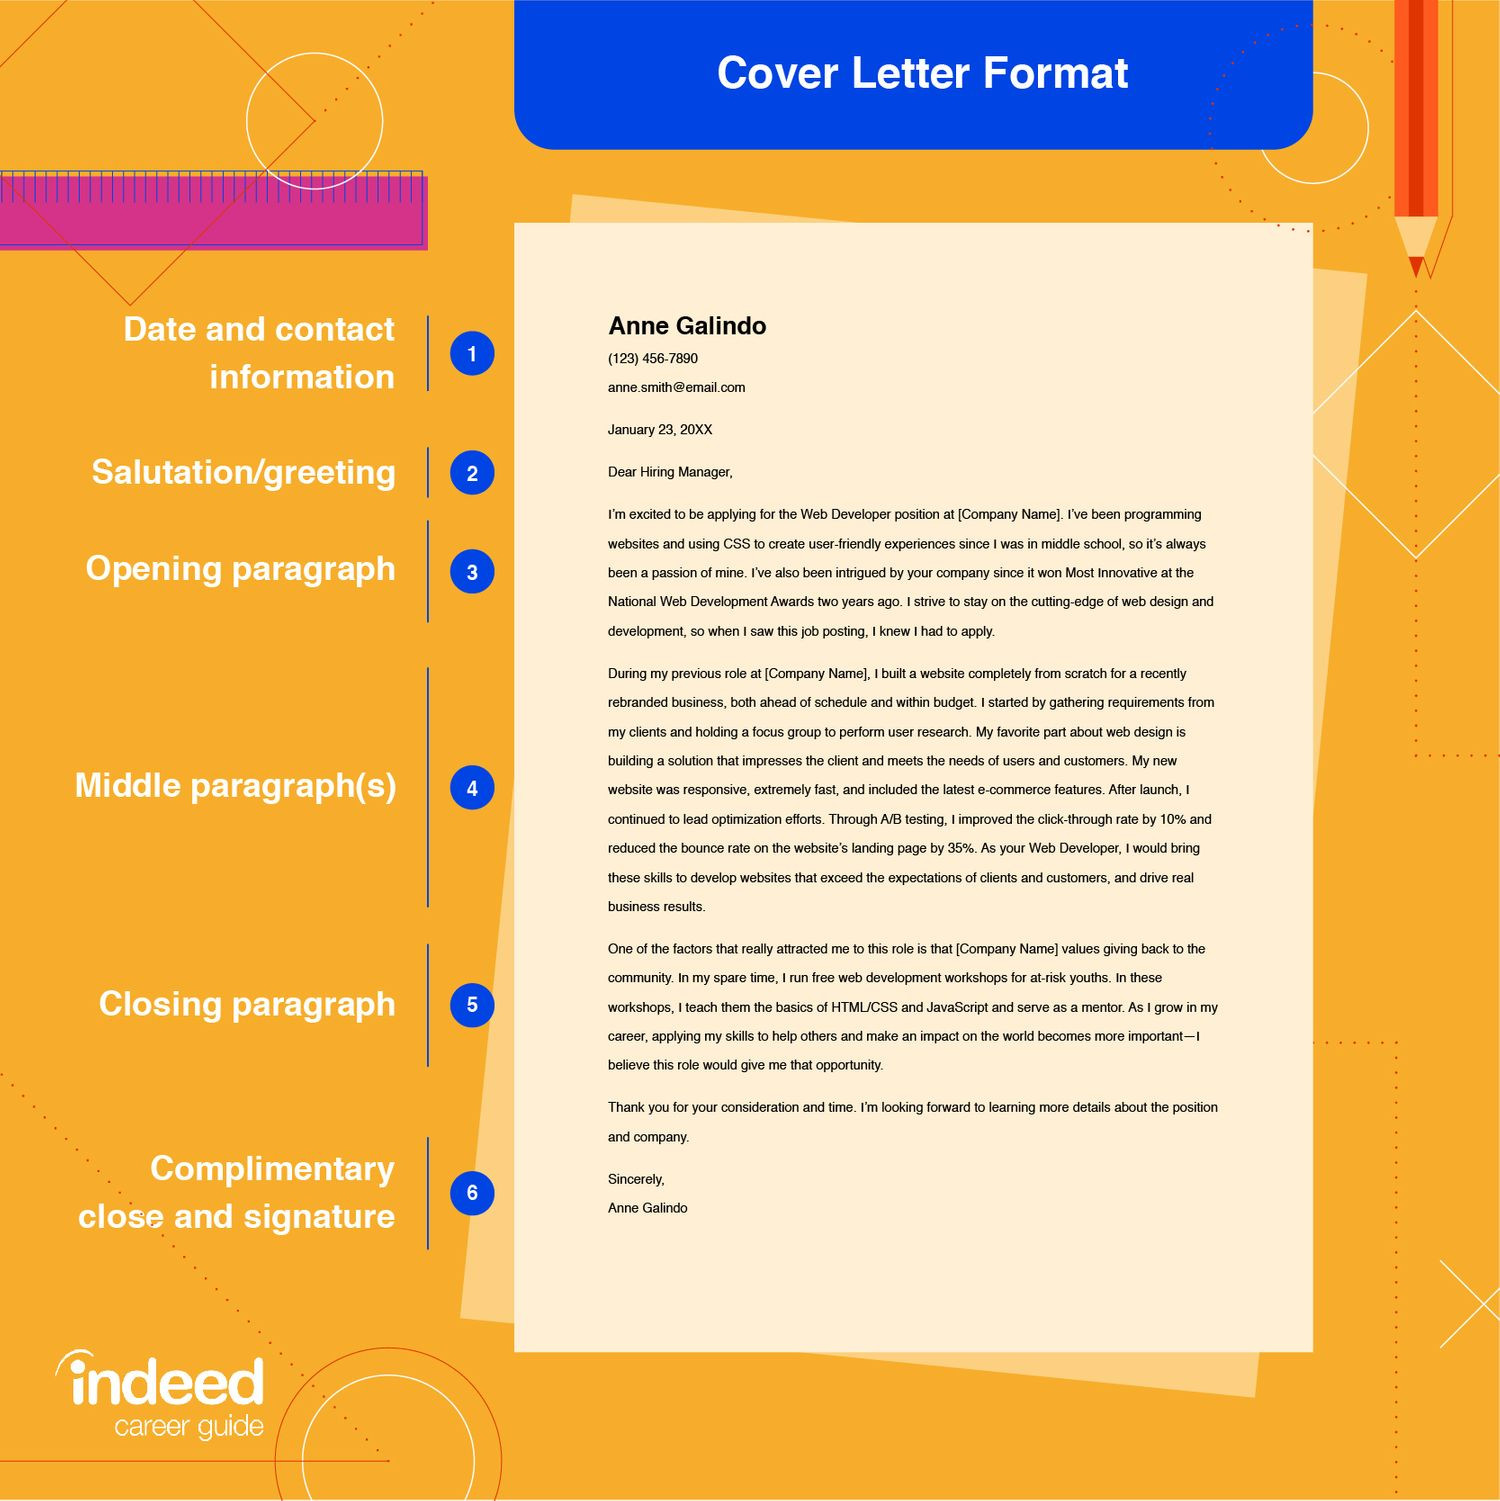 Sample Email Message for Sending Cover Letter and Resume How to Send An Email Cover Letter (with Example) Indeed.com